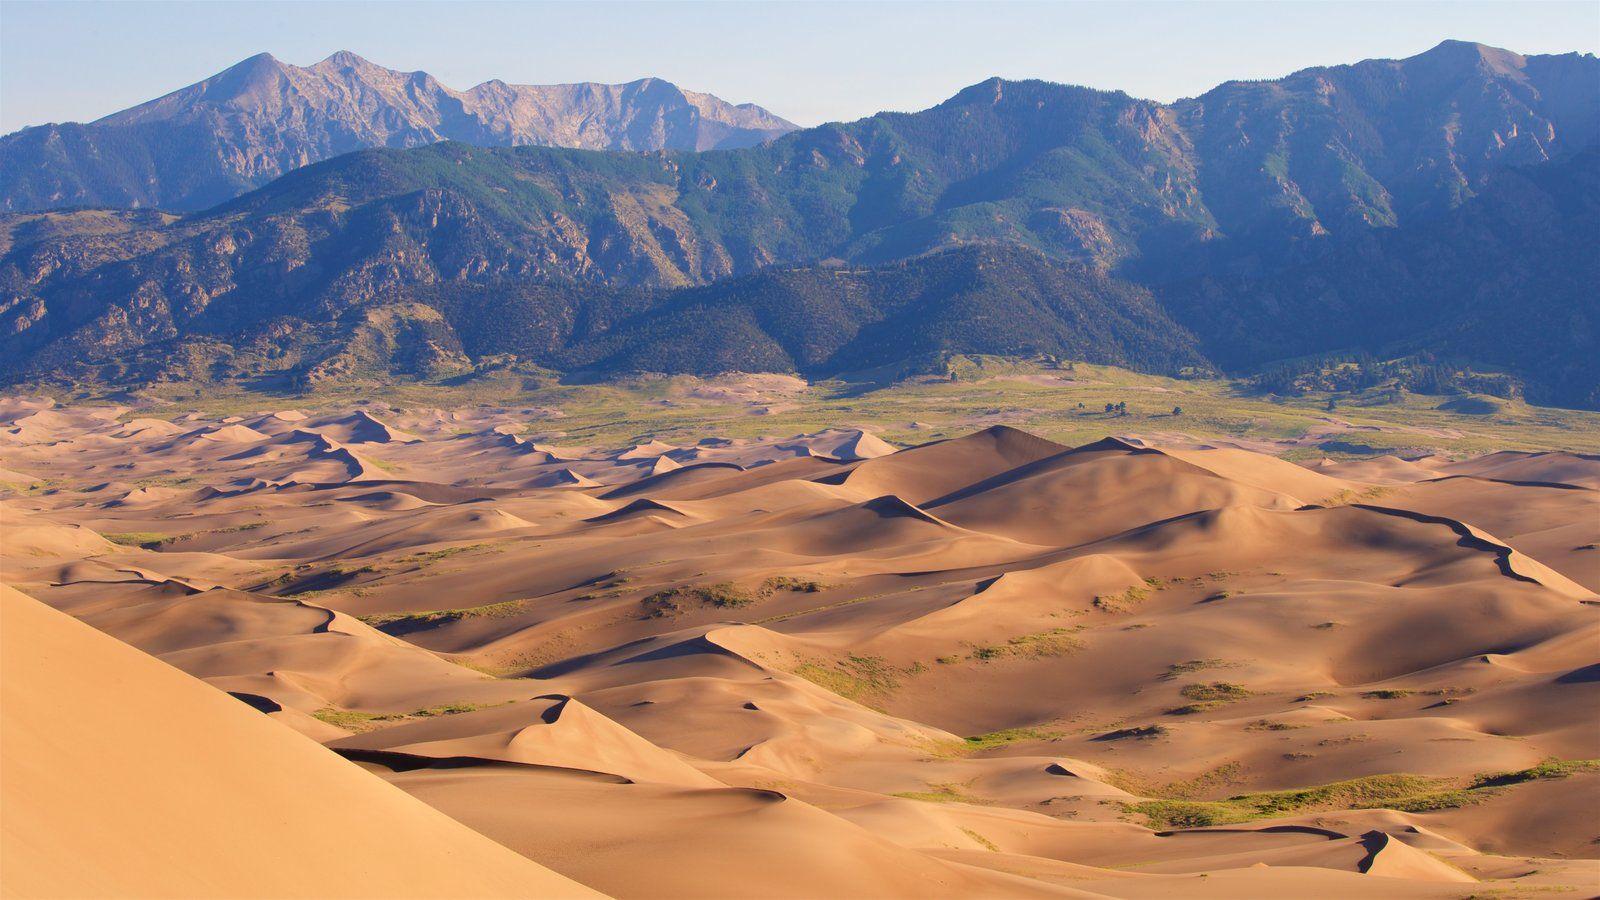 Mountain Picture: View Image of Great Sand Dunes National Park